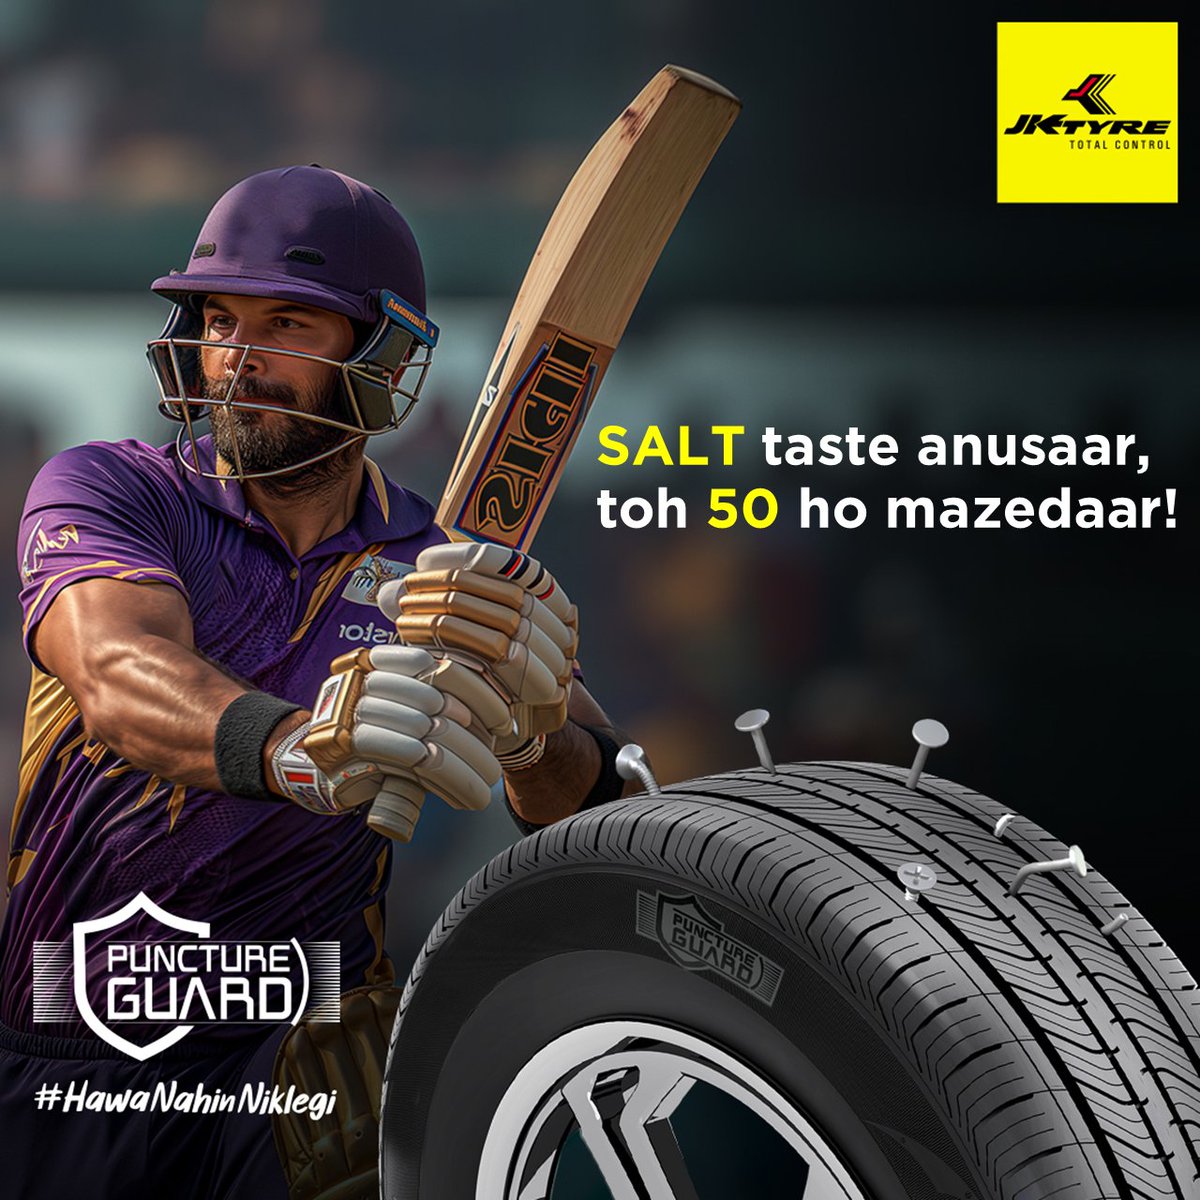 A half century that gives a solid start to the team just like #PunctureGuard from JK Tyre that protects you from all the keels. Ab #HawaNahinNiklegi #JKTyre #IndianT20League #Kolkata #Delhi